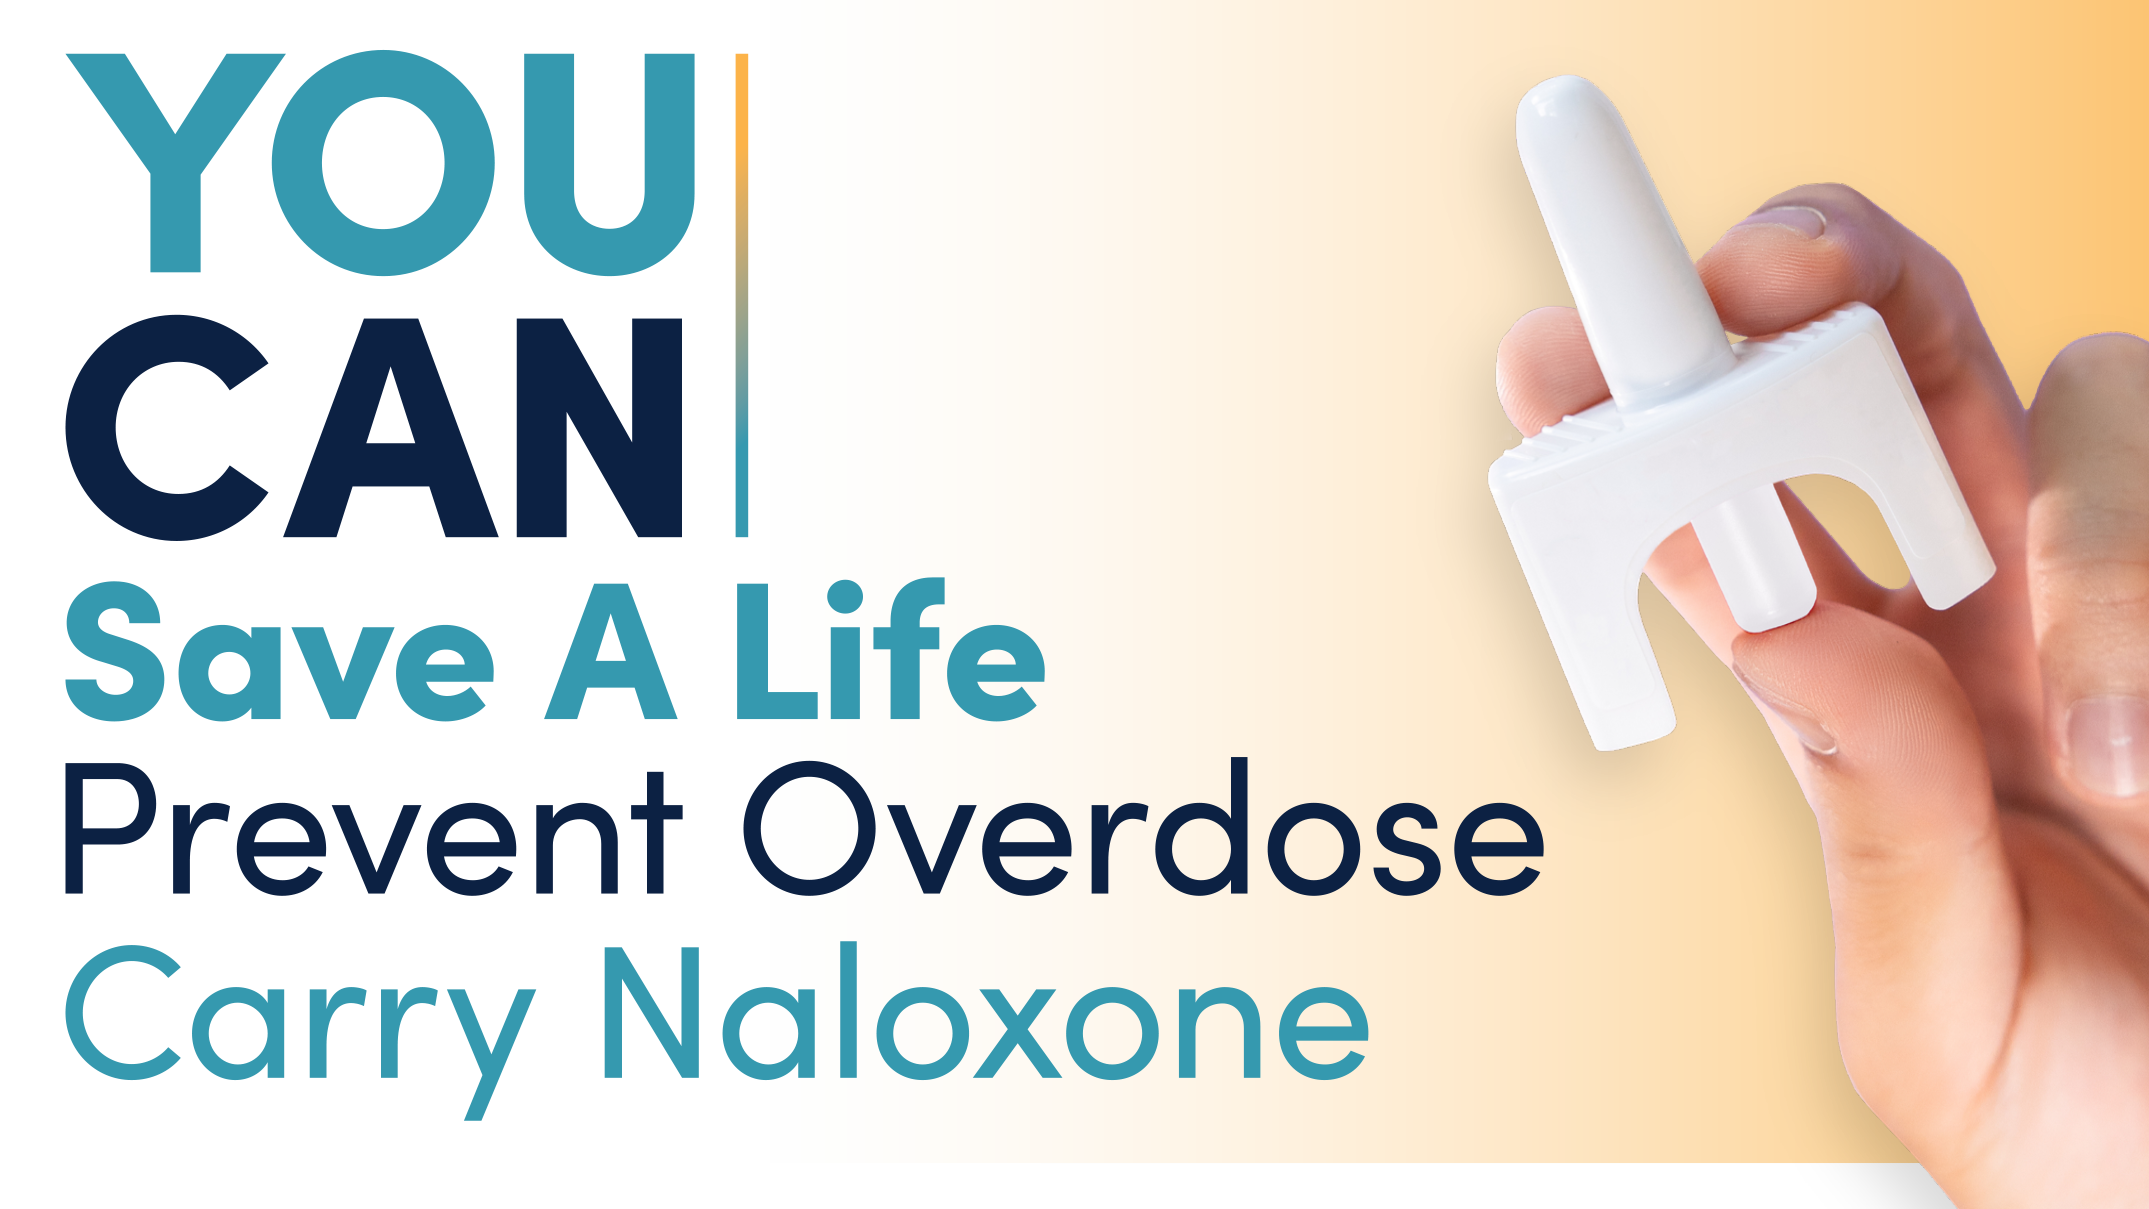 You can save a life. Prevent Overdose. Carry Naloxone